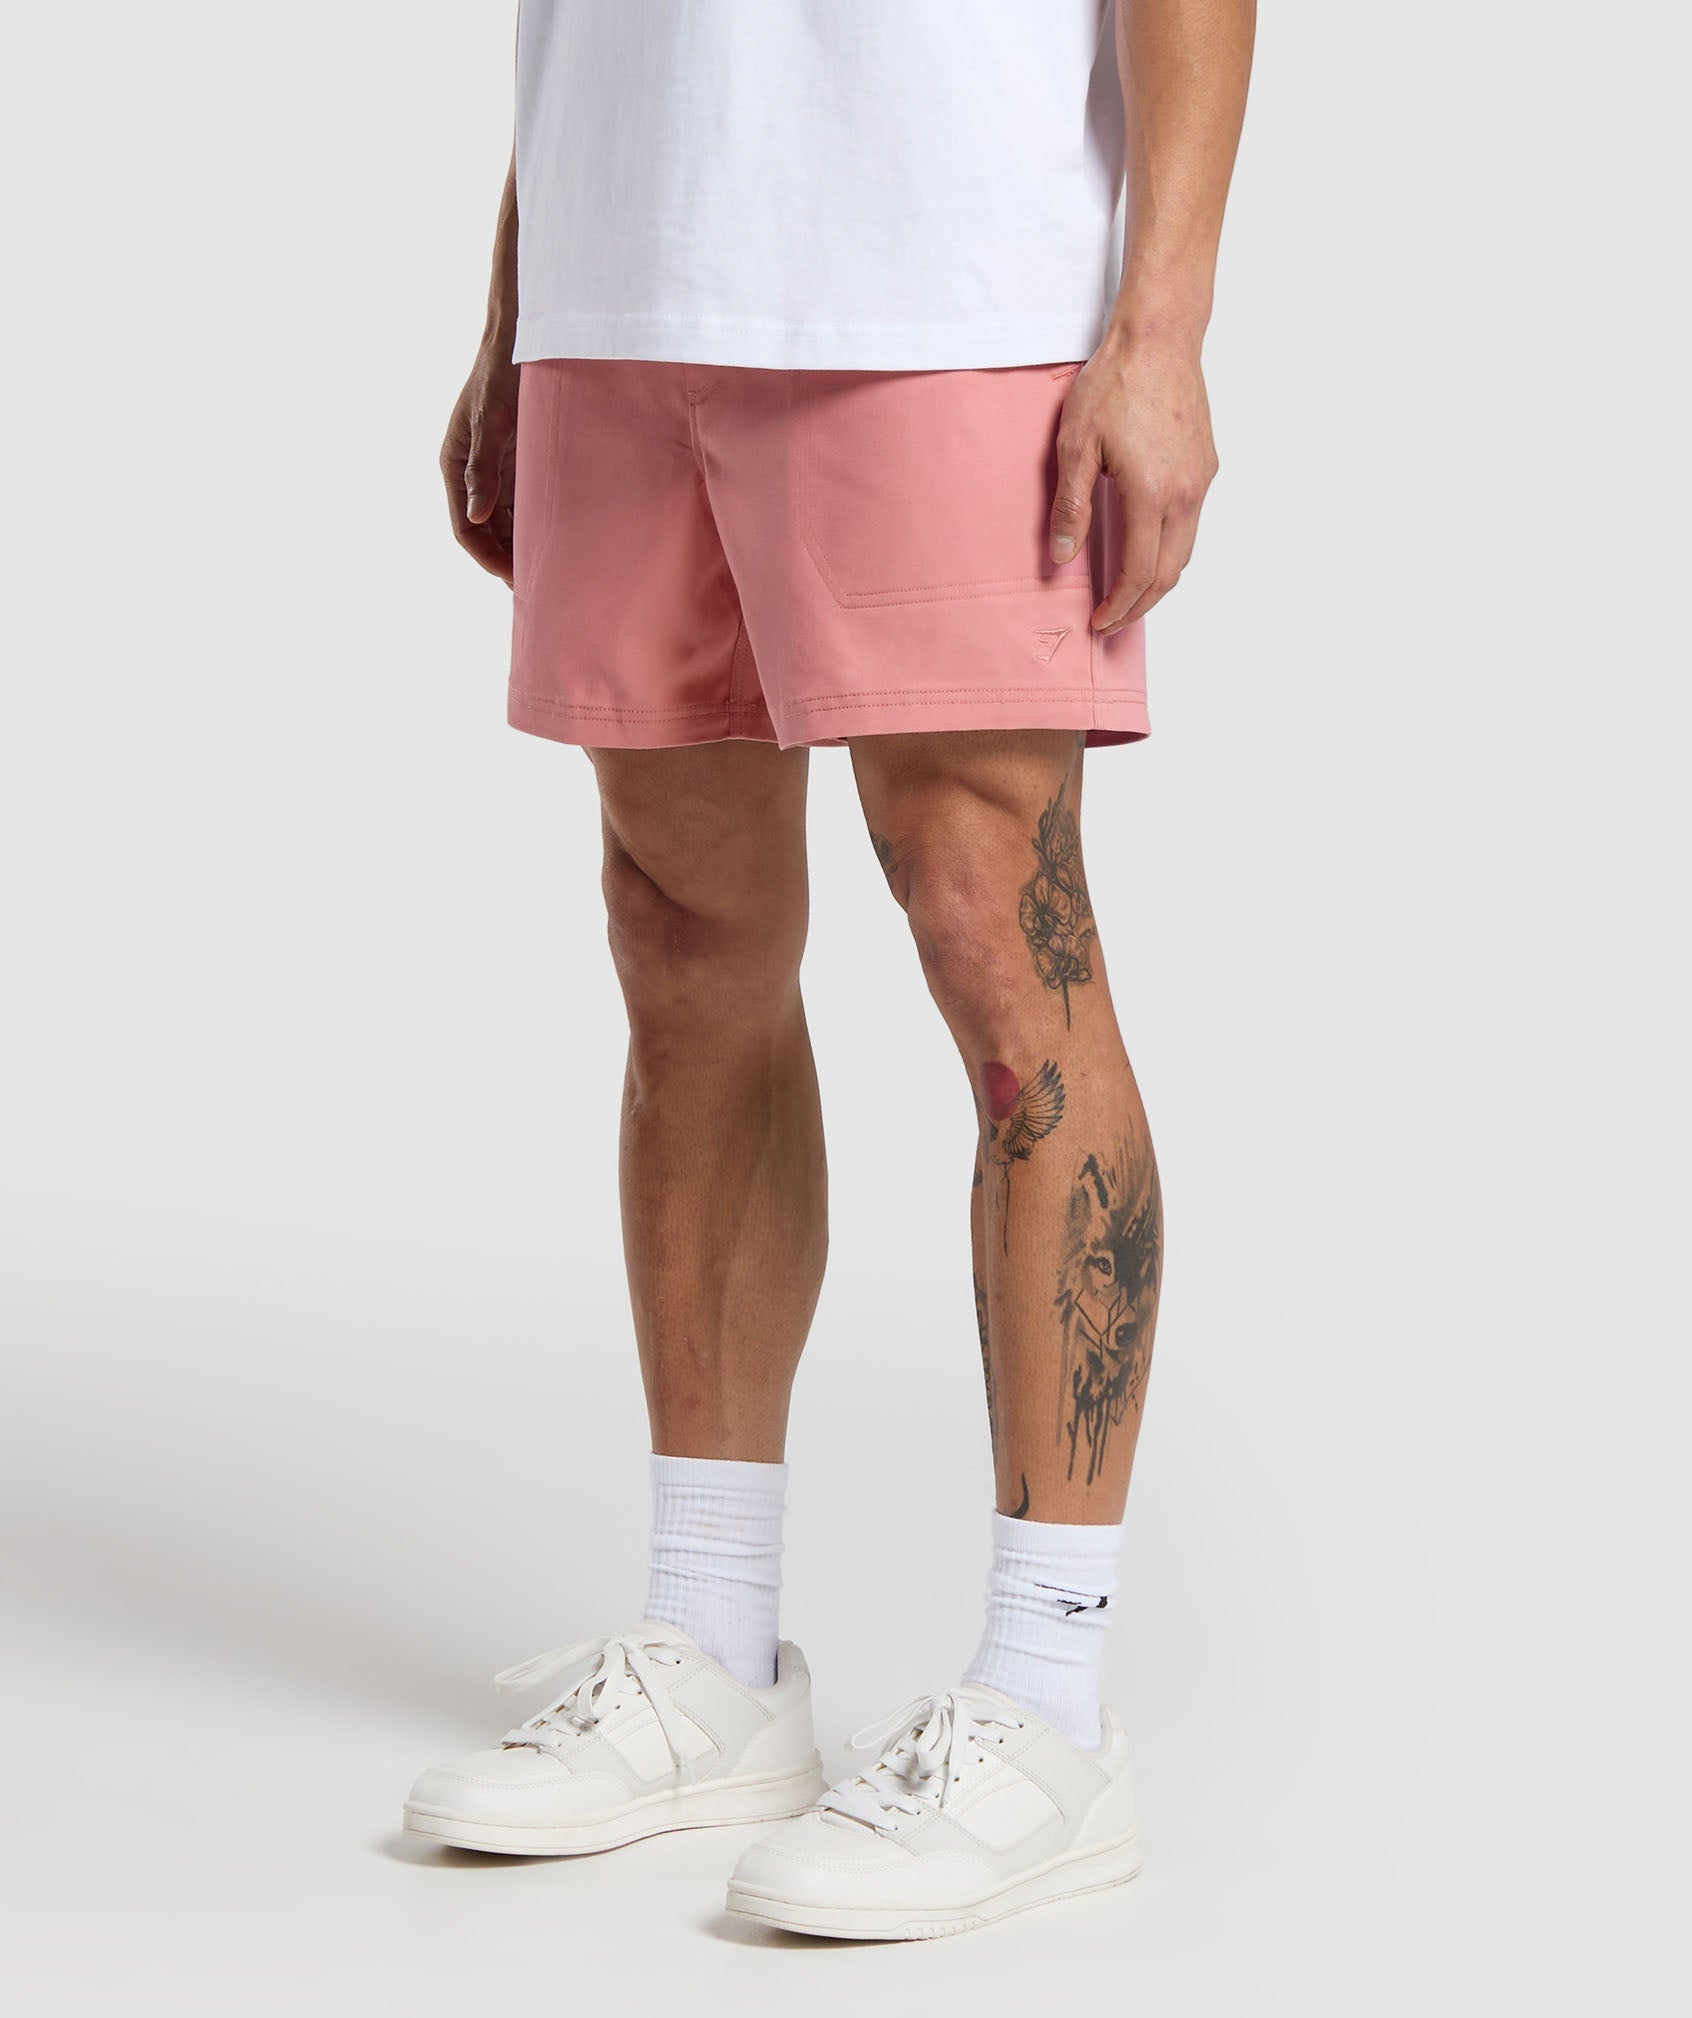 Rest Day Woven Shorts in Classic Pink - view 3